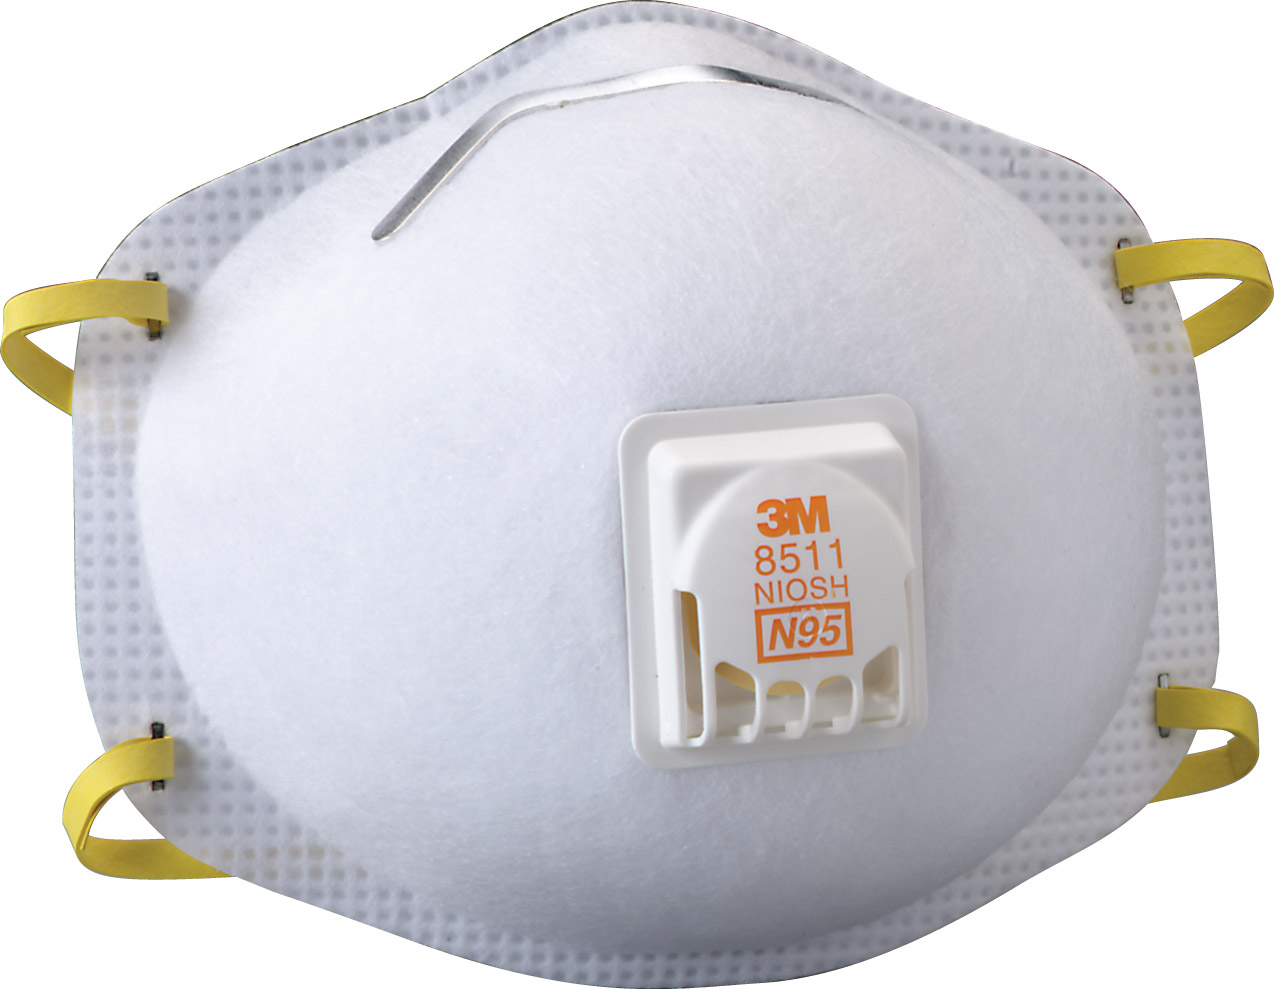 OUT OF STOCK -  NO ESTIMATED RETURN DATE 3M 8511 N95 Particulate Respirator